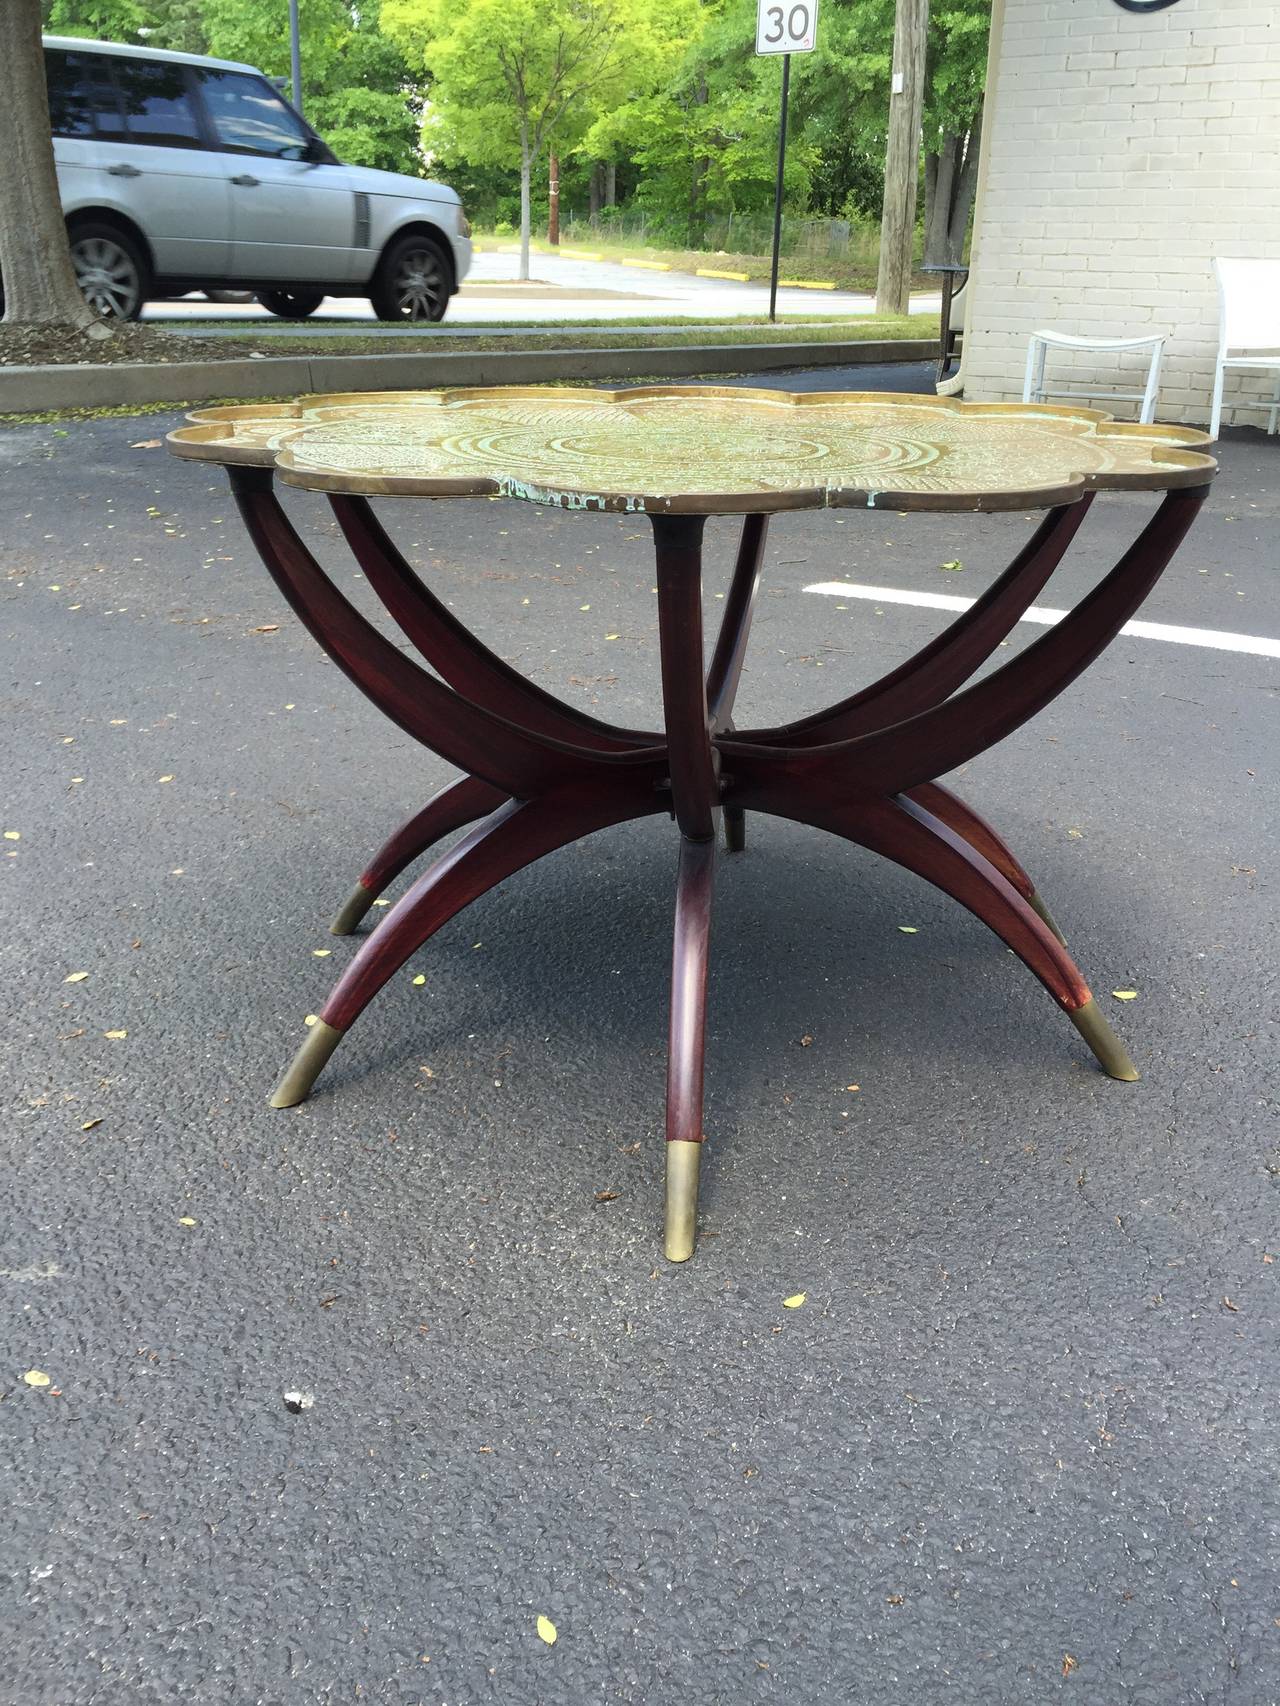 Beautiful Mid-Century wood and brass coffee table. This interesting design is comprised of a sculptural wood base with brass feet and removable brass tray top. The top has a Fine etched design inlaid in the brass. The base can fold up for storage